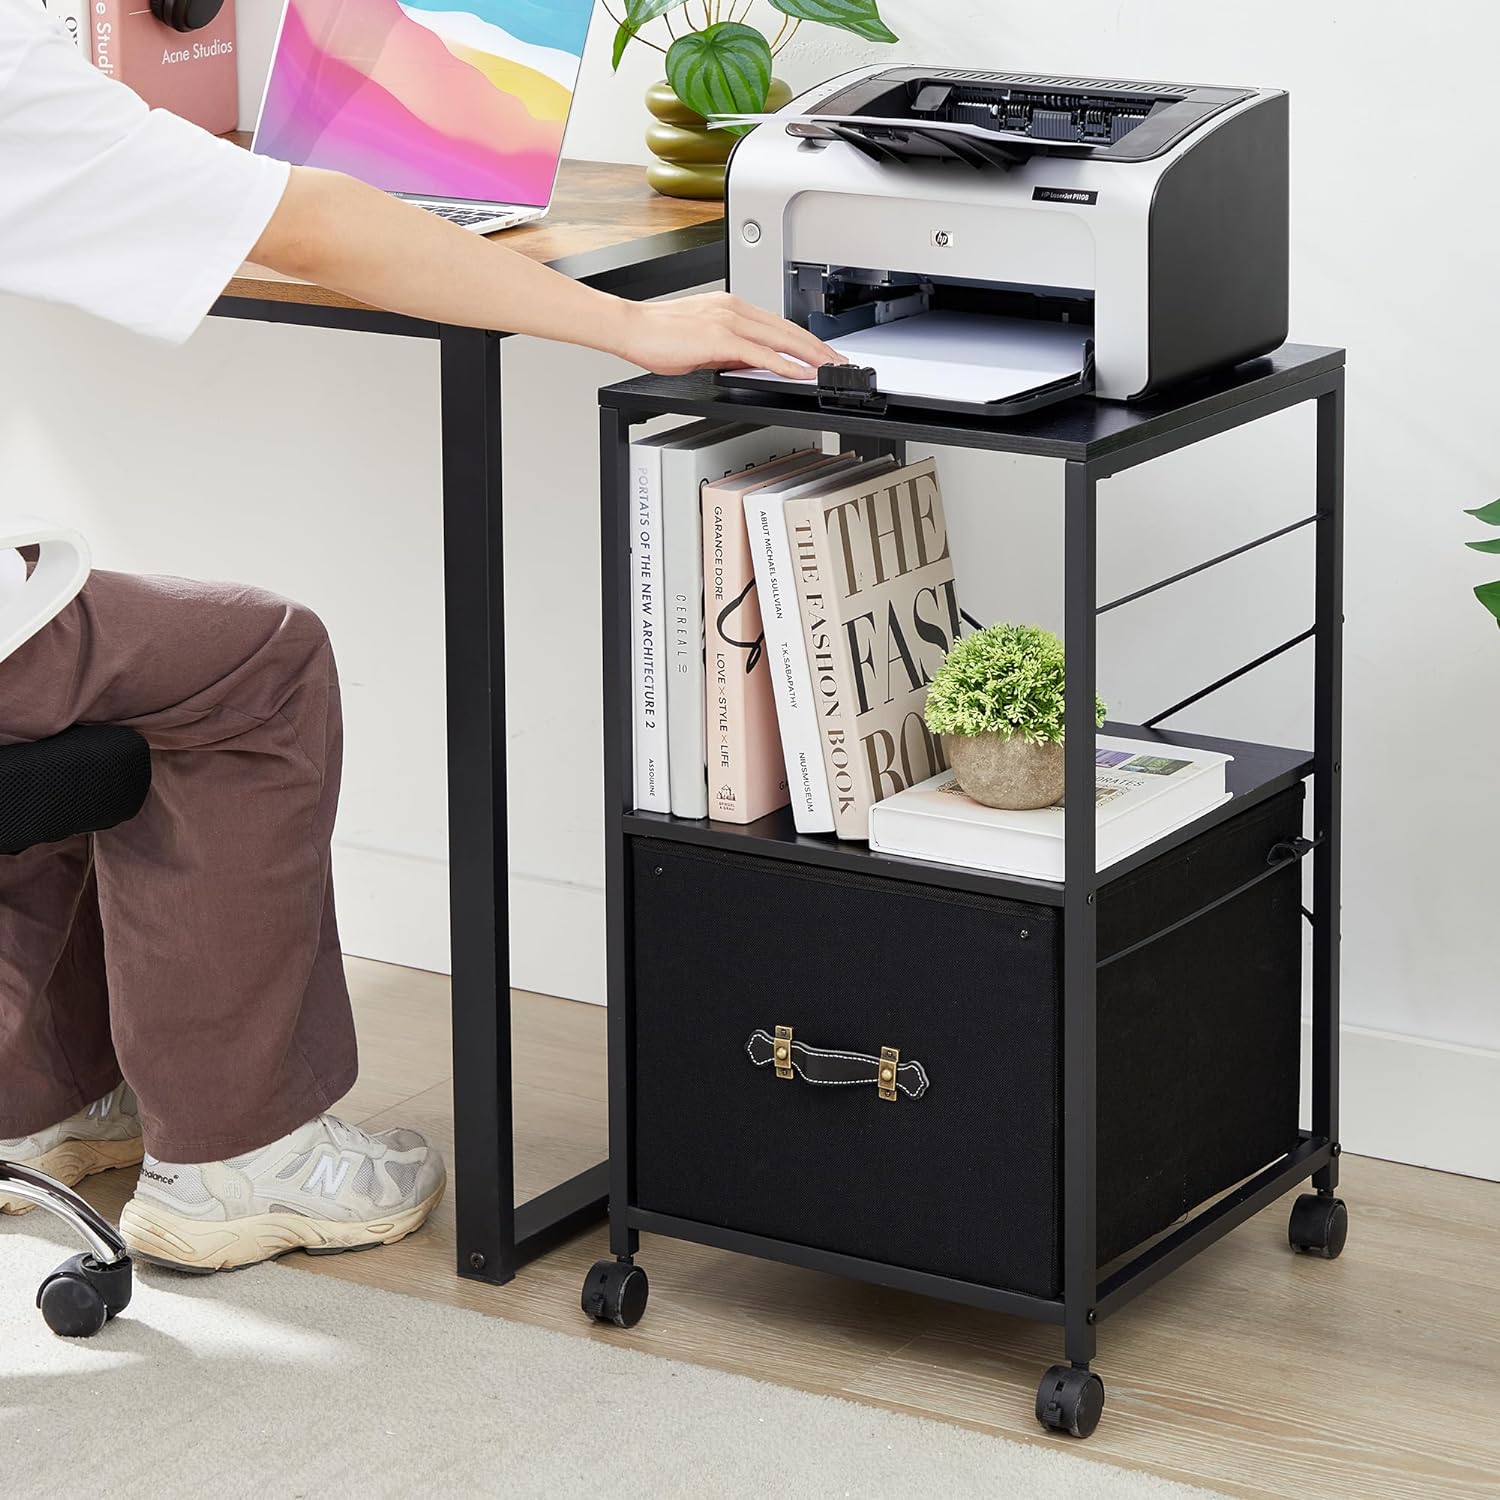 VECELO File Cabinet with Open Storage Shelf, Rolling Printer Stand with Large Fabric Drawer